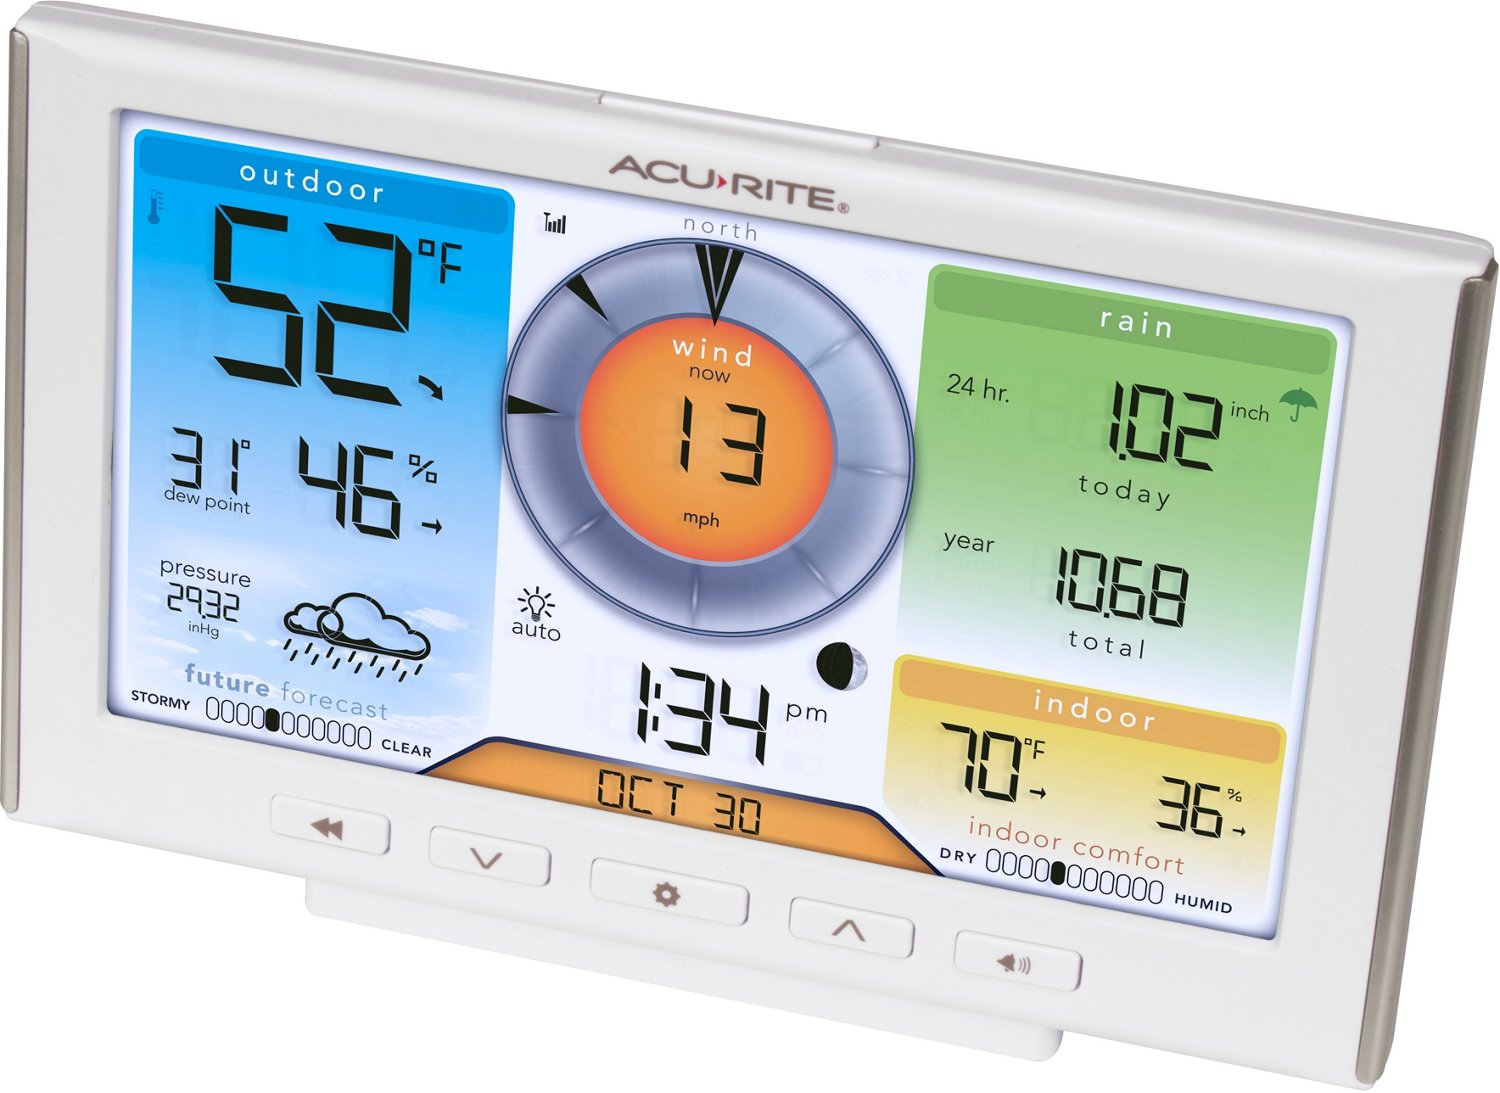 AcuRite Digital Weather Center with Wi-Fi Connection.